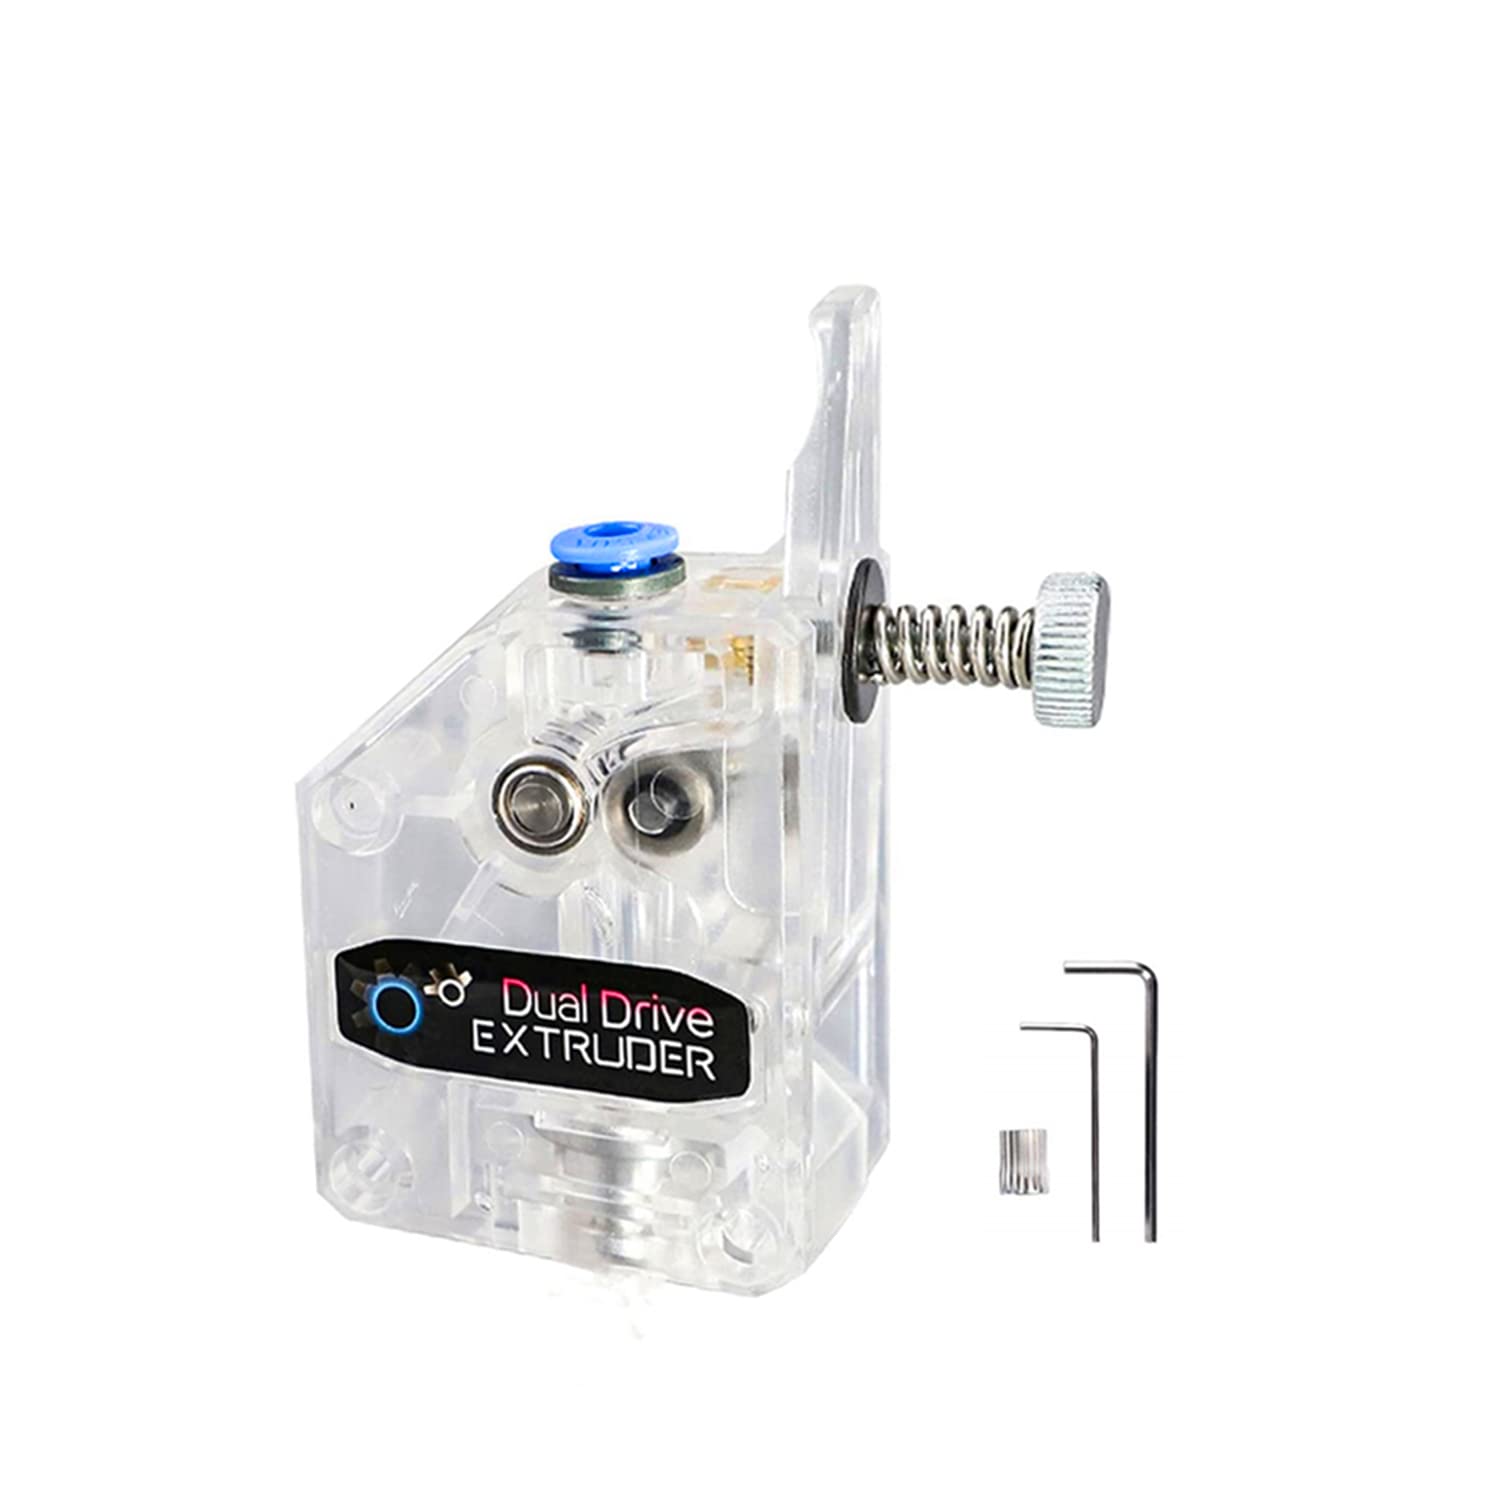 Dual Drive Extruder for 1.75mm Filament